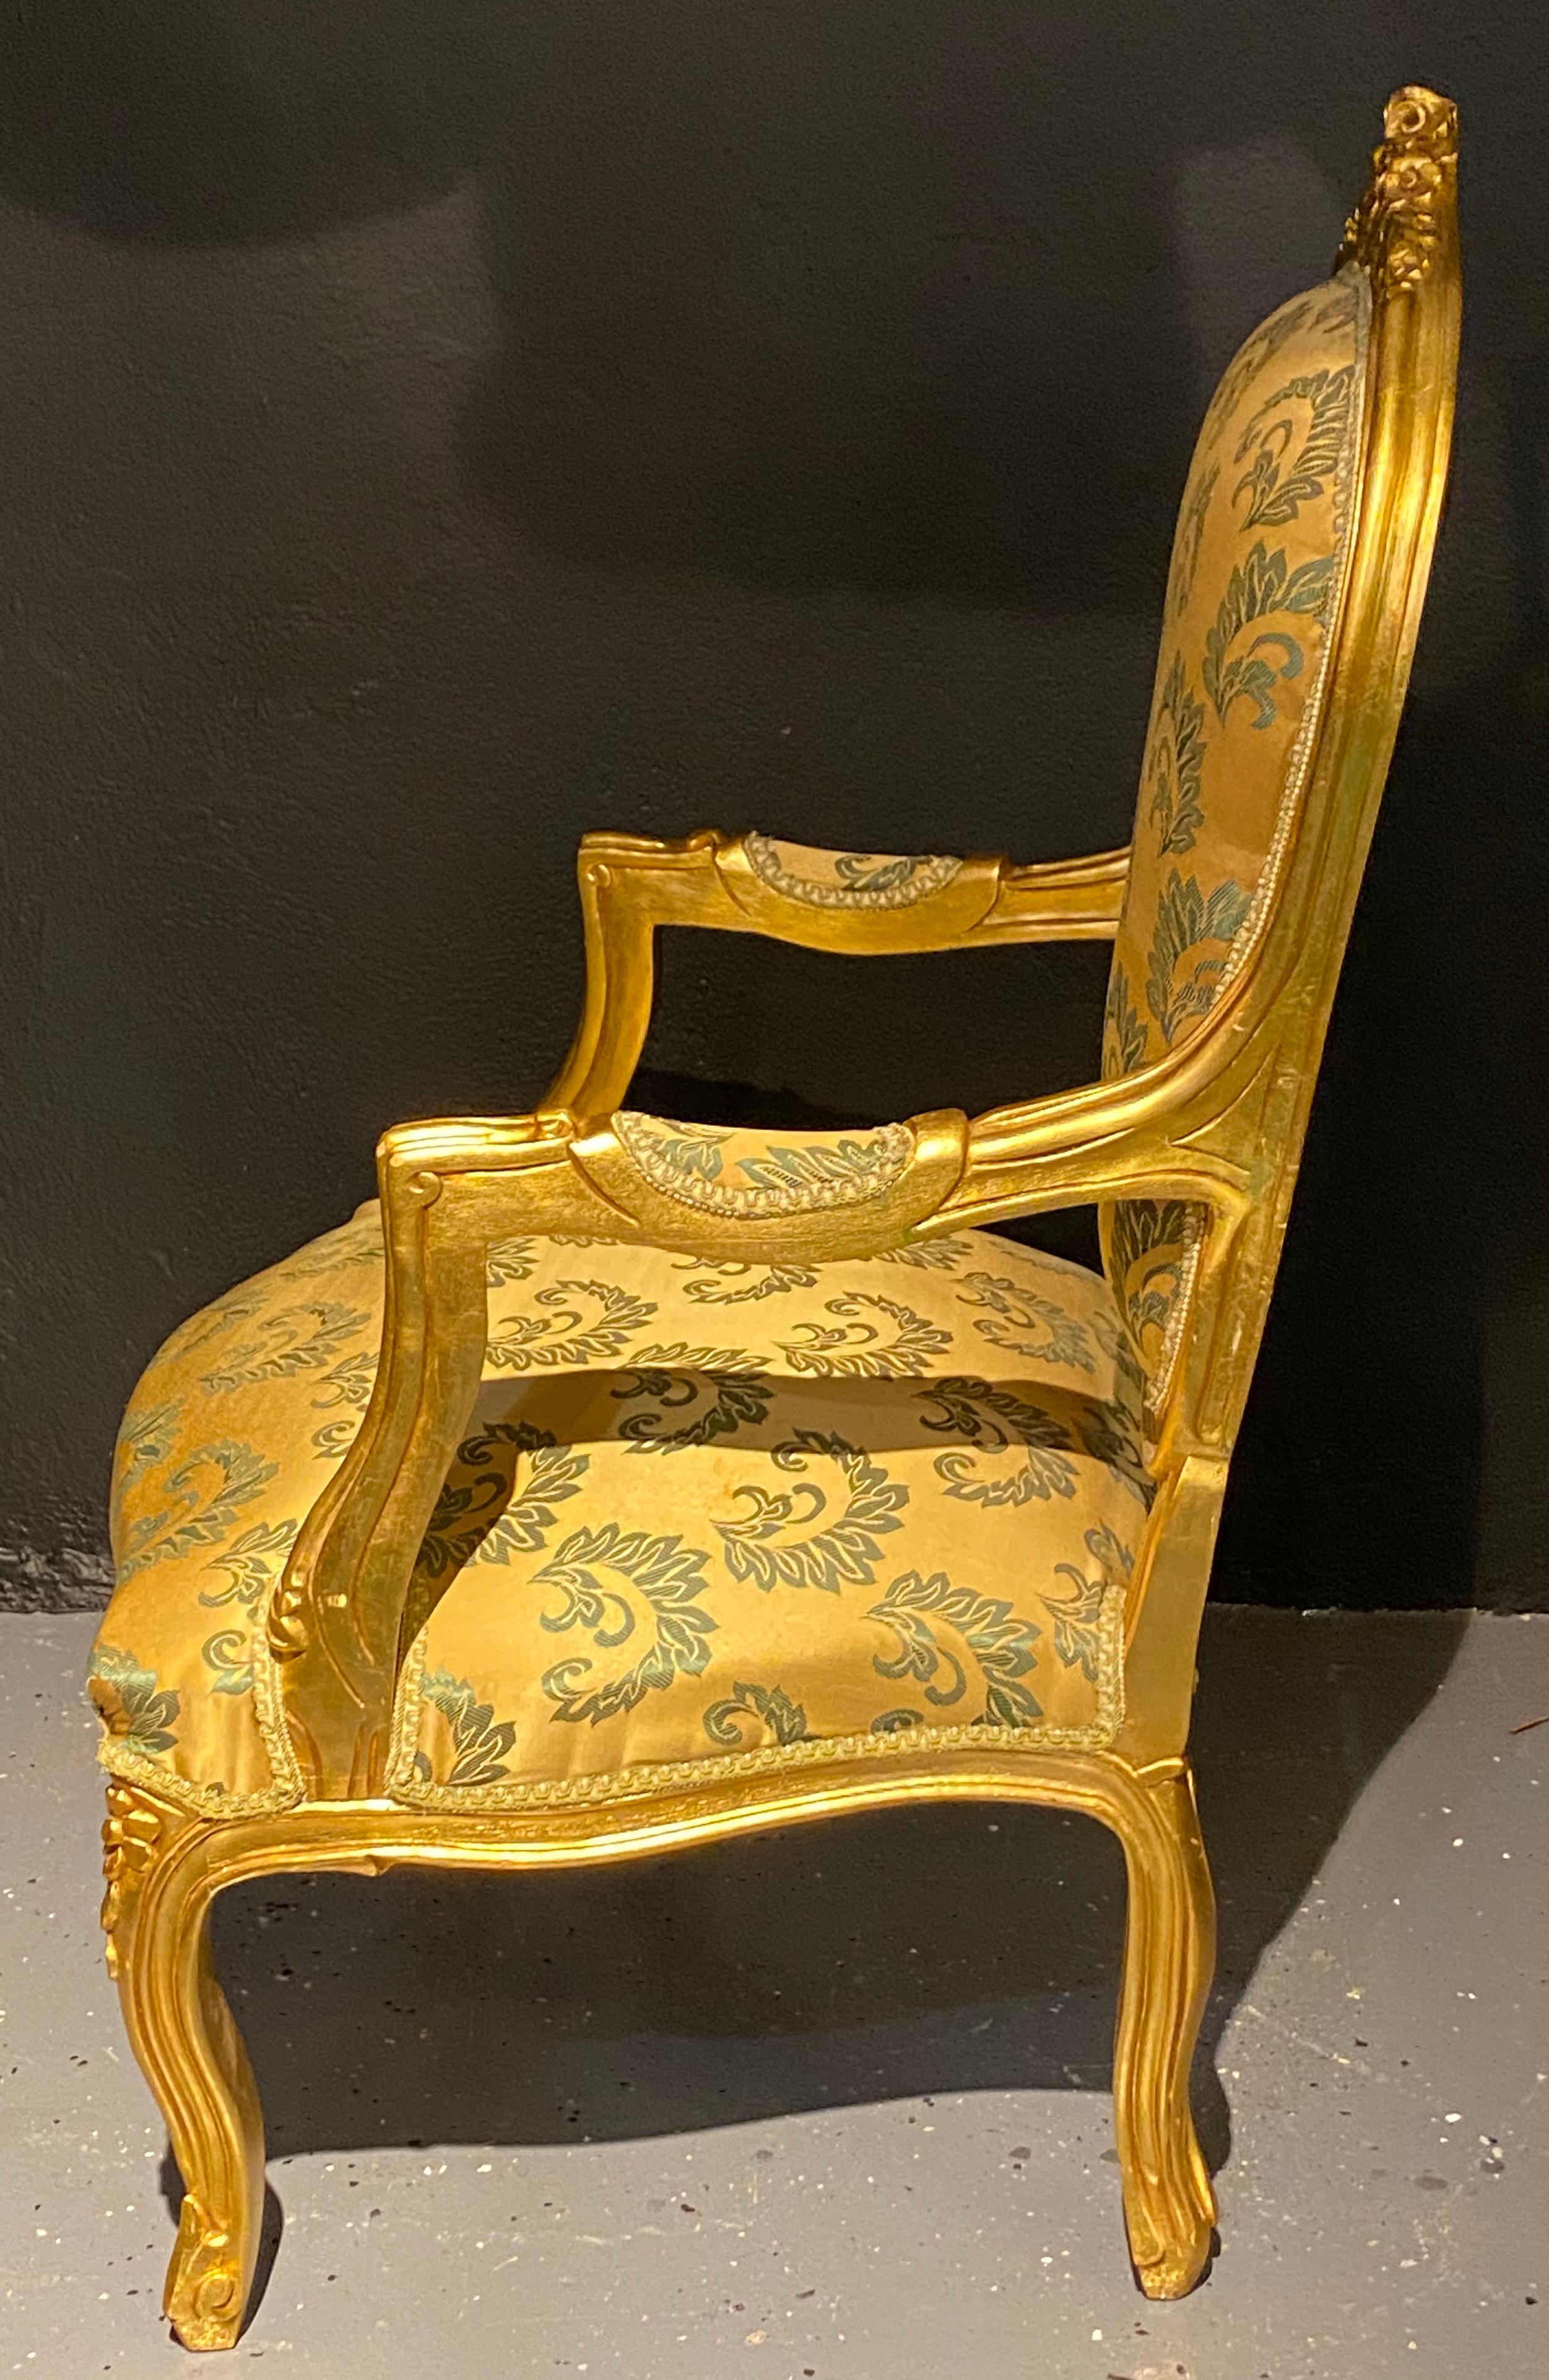 Pair of Louis XV style giltwood fauteuils or armchairs. This stunning pair of gilt gold Fauteuil chairs are covered in a satin Scalamandre upholstery reminiscent of the early French era of opulence. Each strong and sturdy frame having roses carved